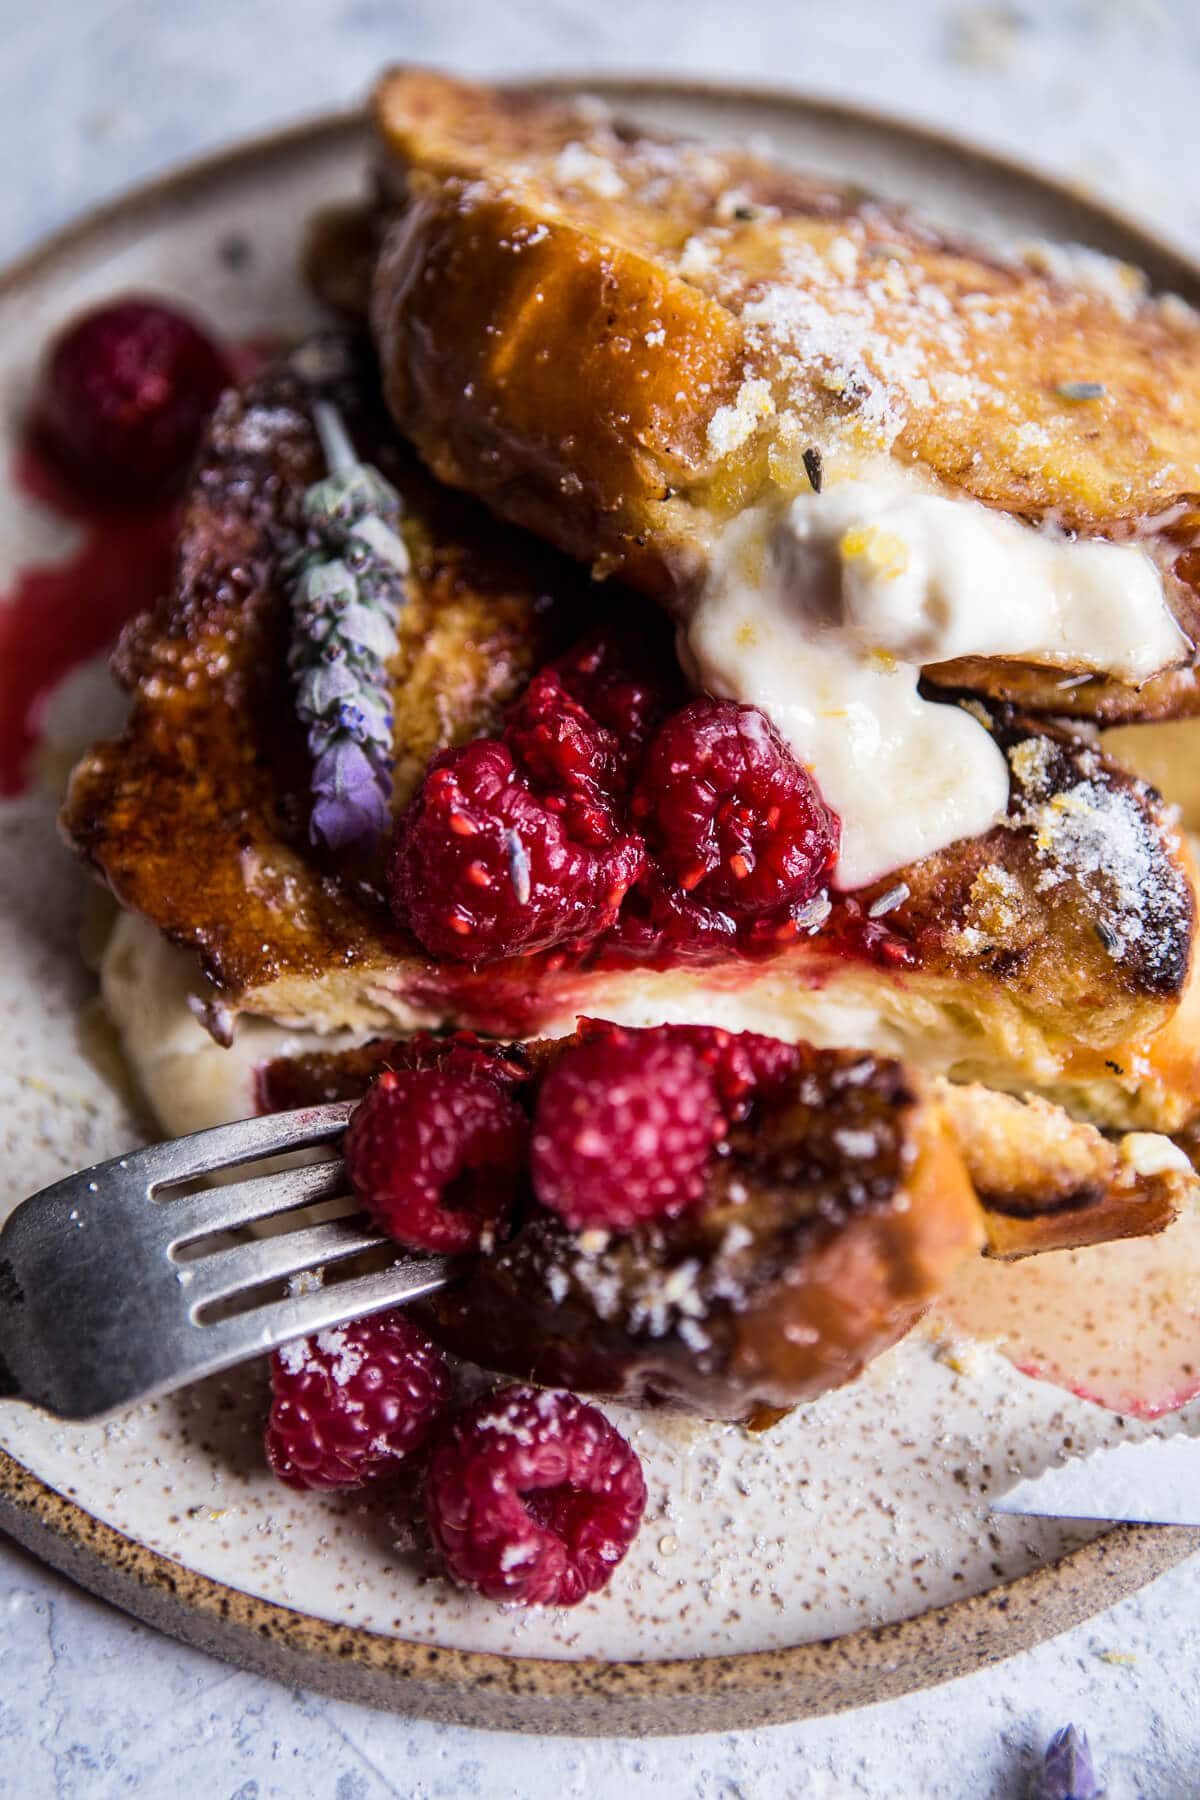 Cream Cheese French Toast
 Whipped Cream Cheese Stuffed French Toast with Raspberries